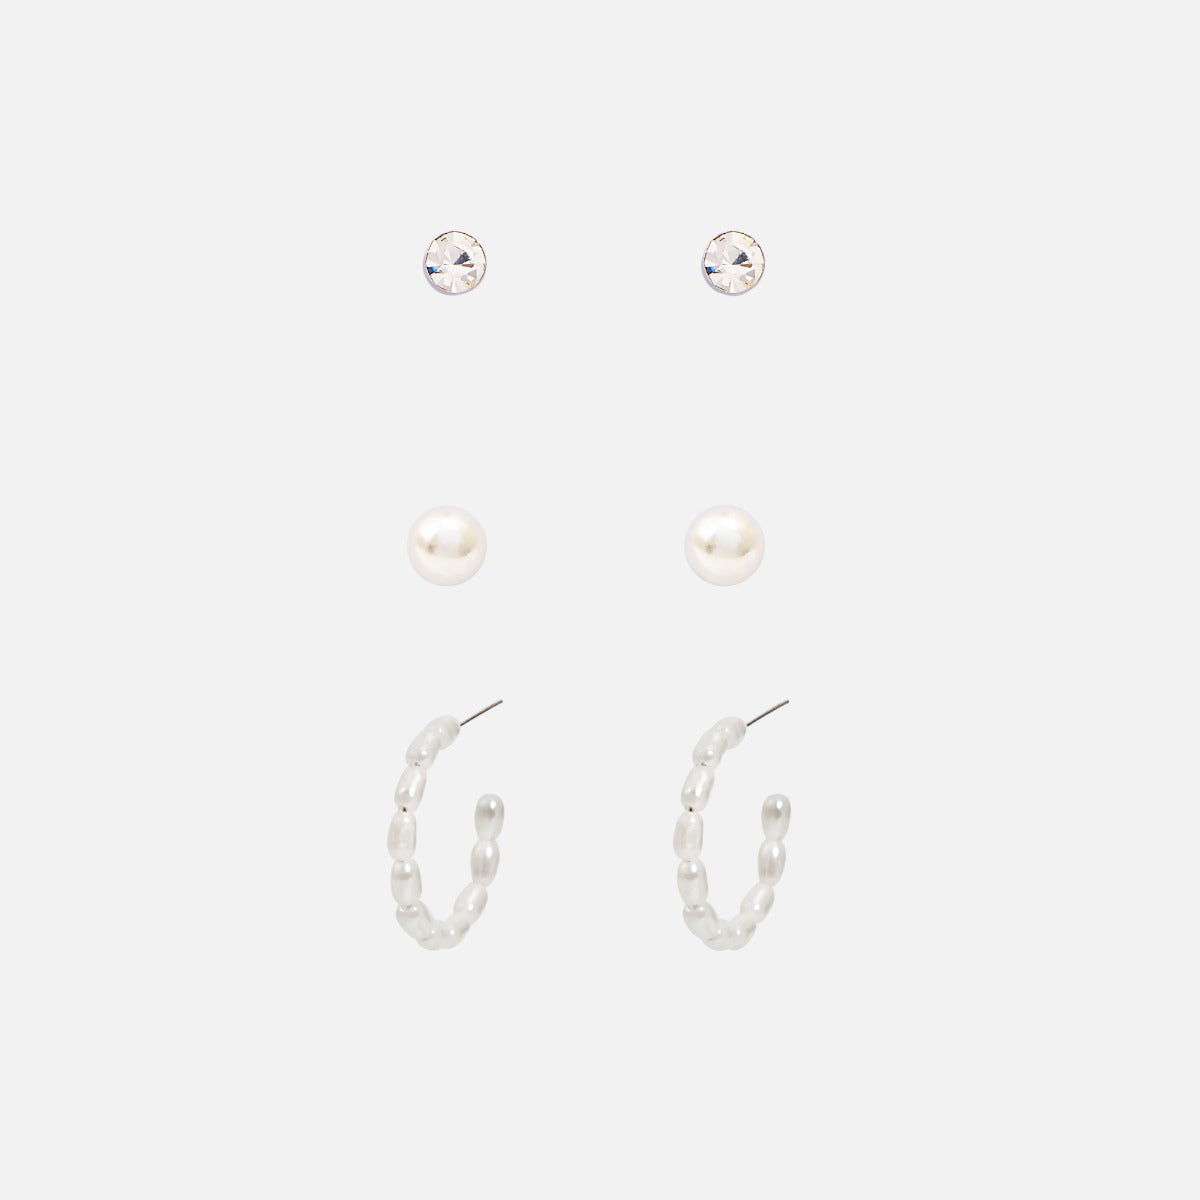 Set of three silvered earrings fixed and hoops with pearls